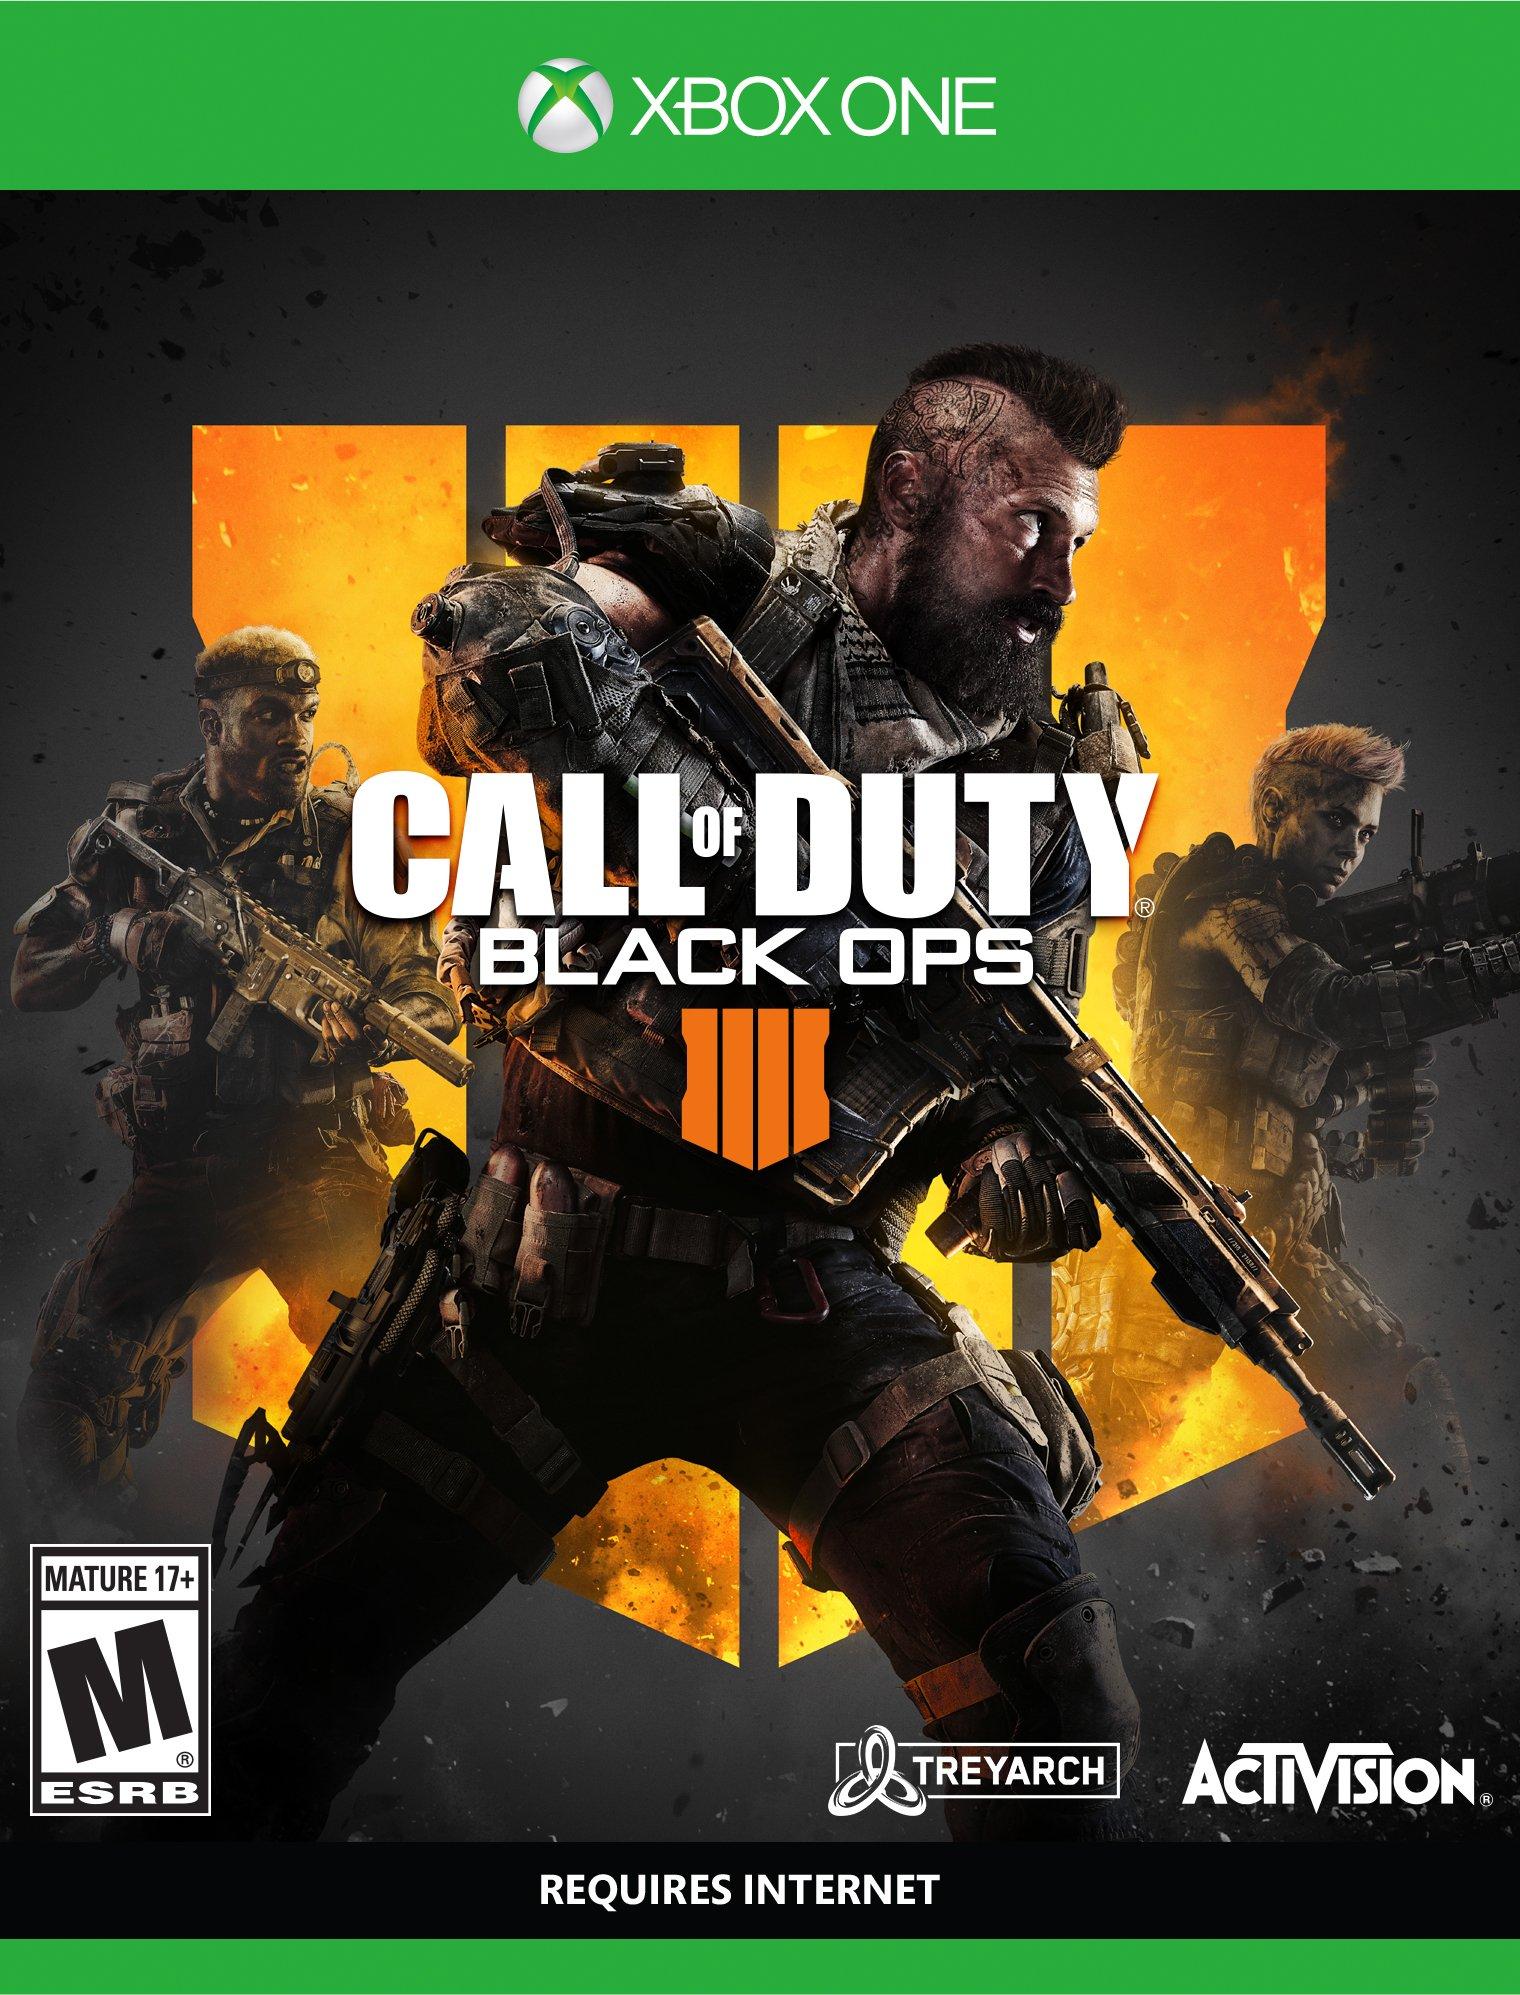 Call of duty black ops 4 ps4 trade in value Call Of Duty Black Ops 4 Gamestop Trade In Cheaper Than Retail Price Buy Clothing Accessories And Lifestyle Products For Women Men